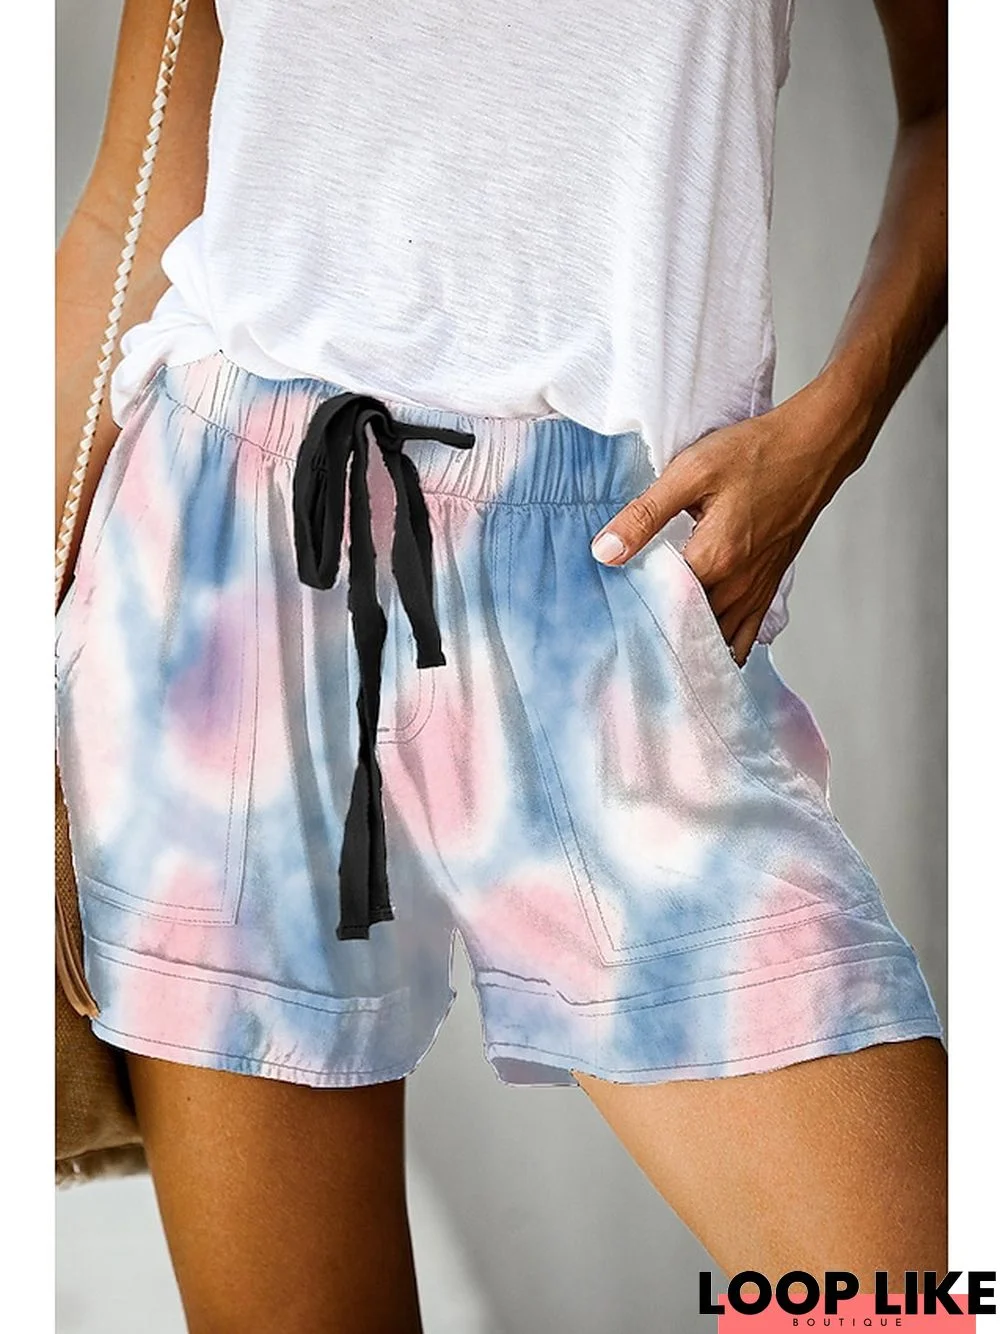 Women's Slacks Shorts Black / Red Smoky gray Red High Waist Cute Simple Casual Daily Beach Stretchy Short Comfort Tie Dye S M L XL XXL / Loose Fit